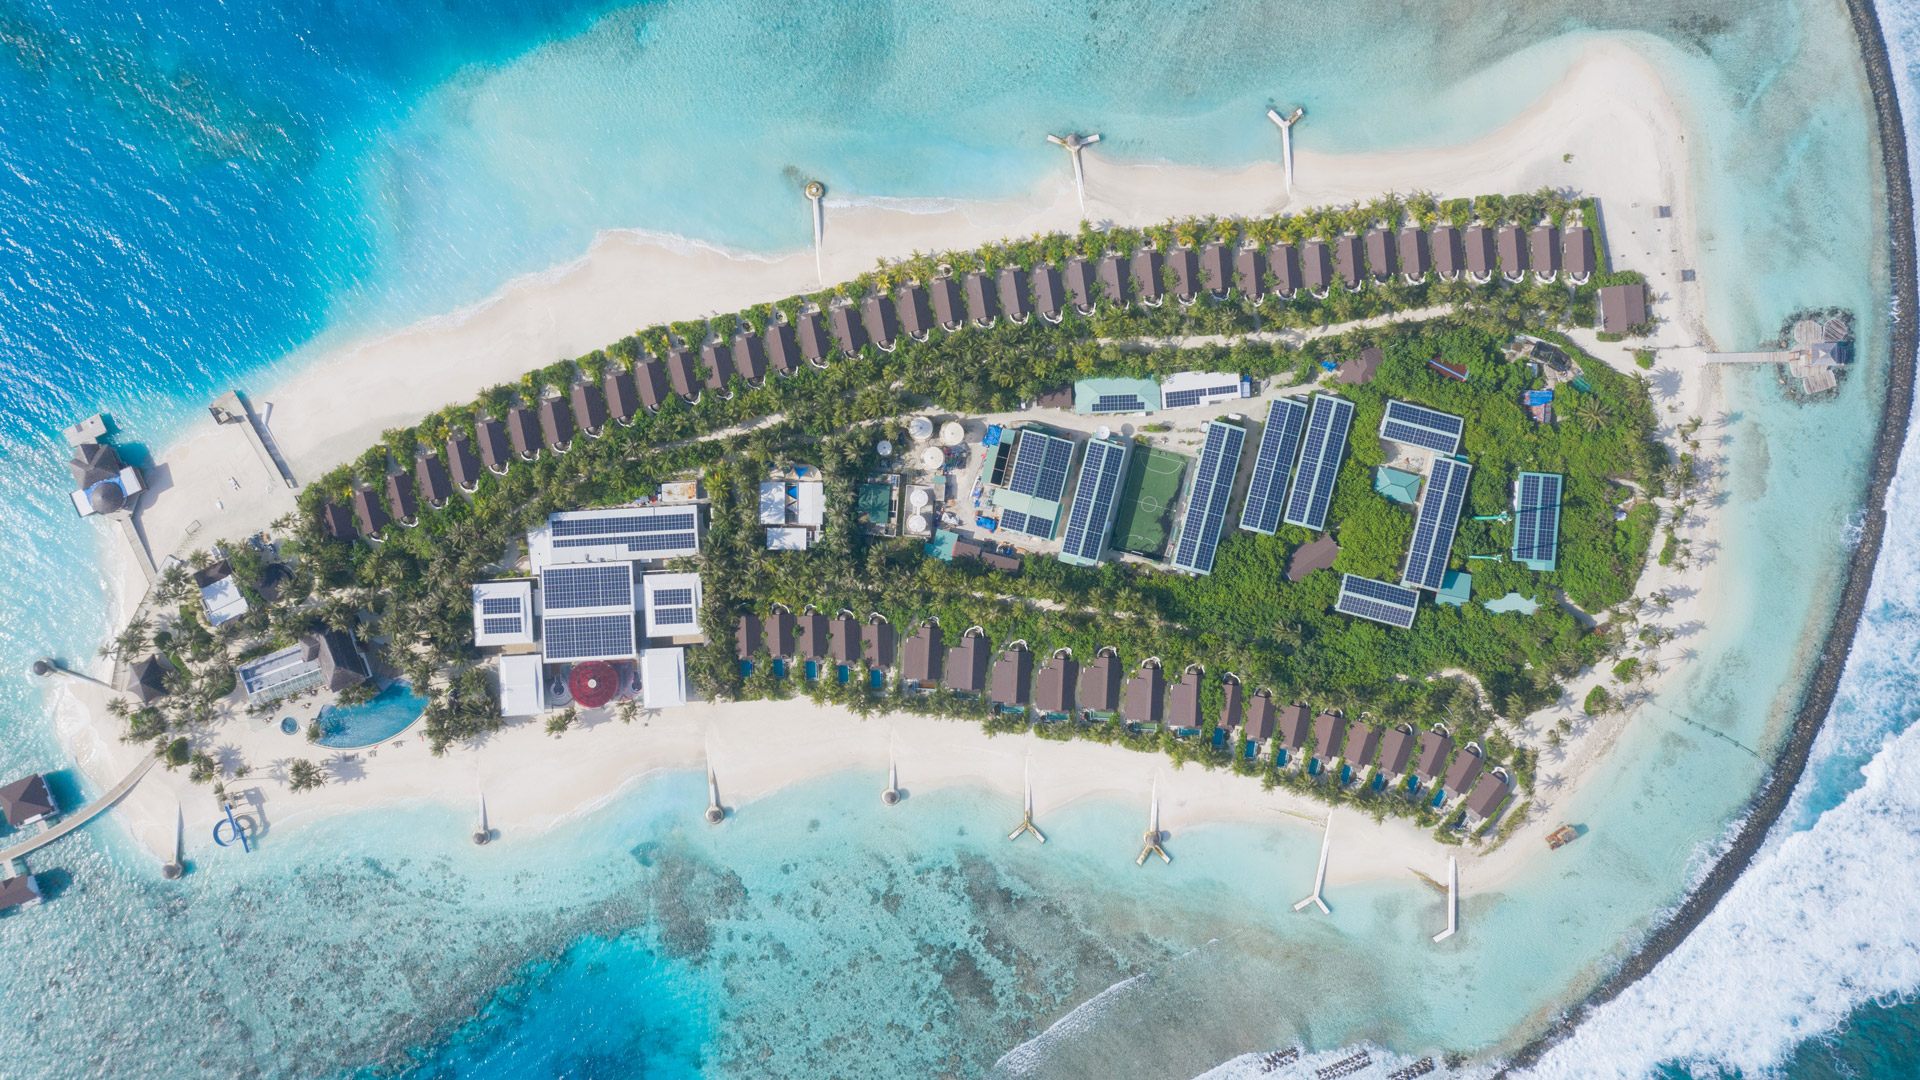 Swimsol RoofSolar PV installation at a Maldives Resort (Oblu Select by Atmosphere)